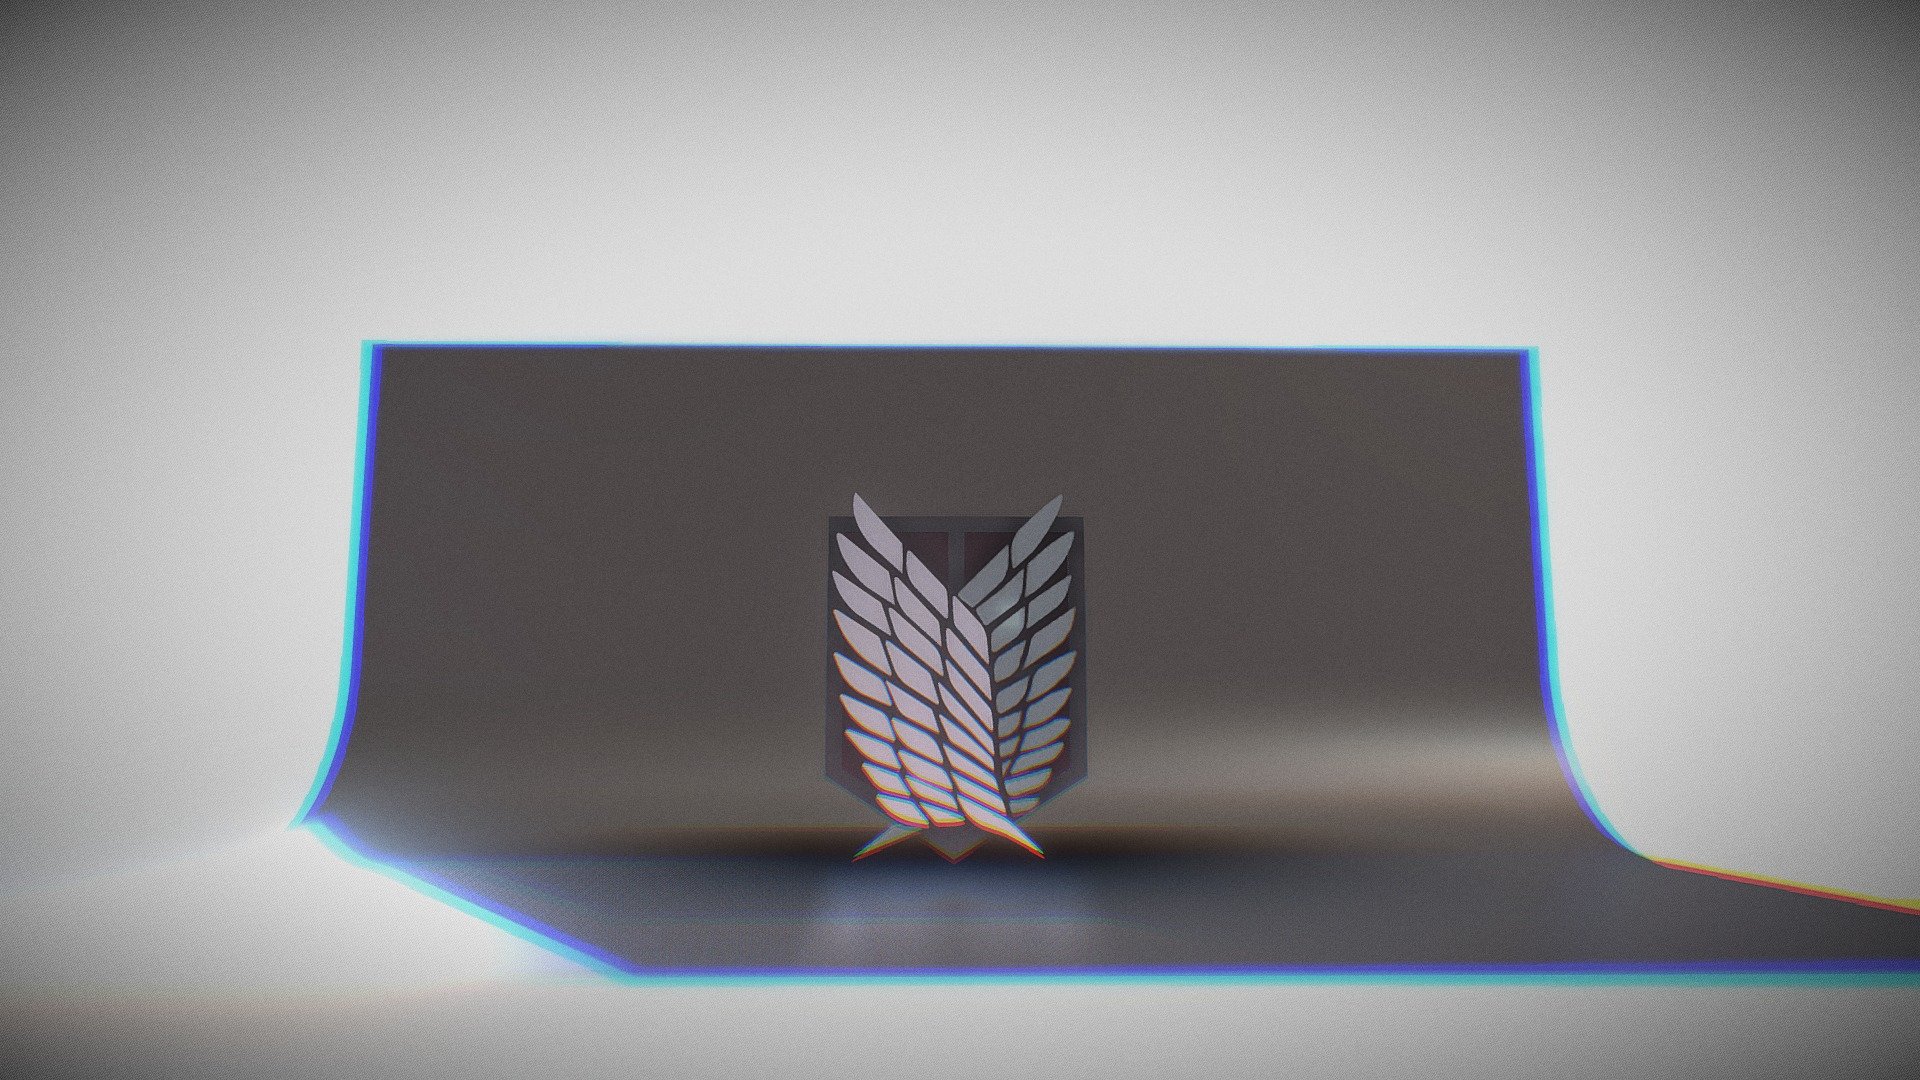 survey corps symbol. 
from attack on titan 3d model